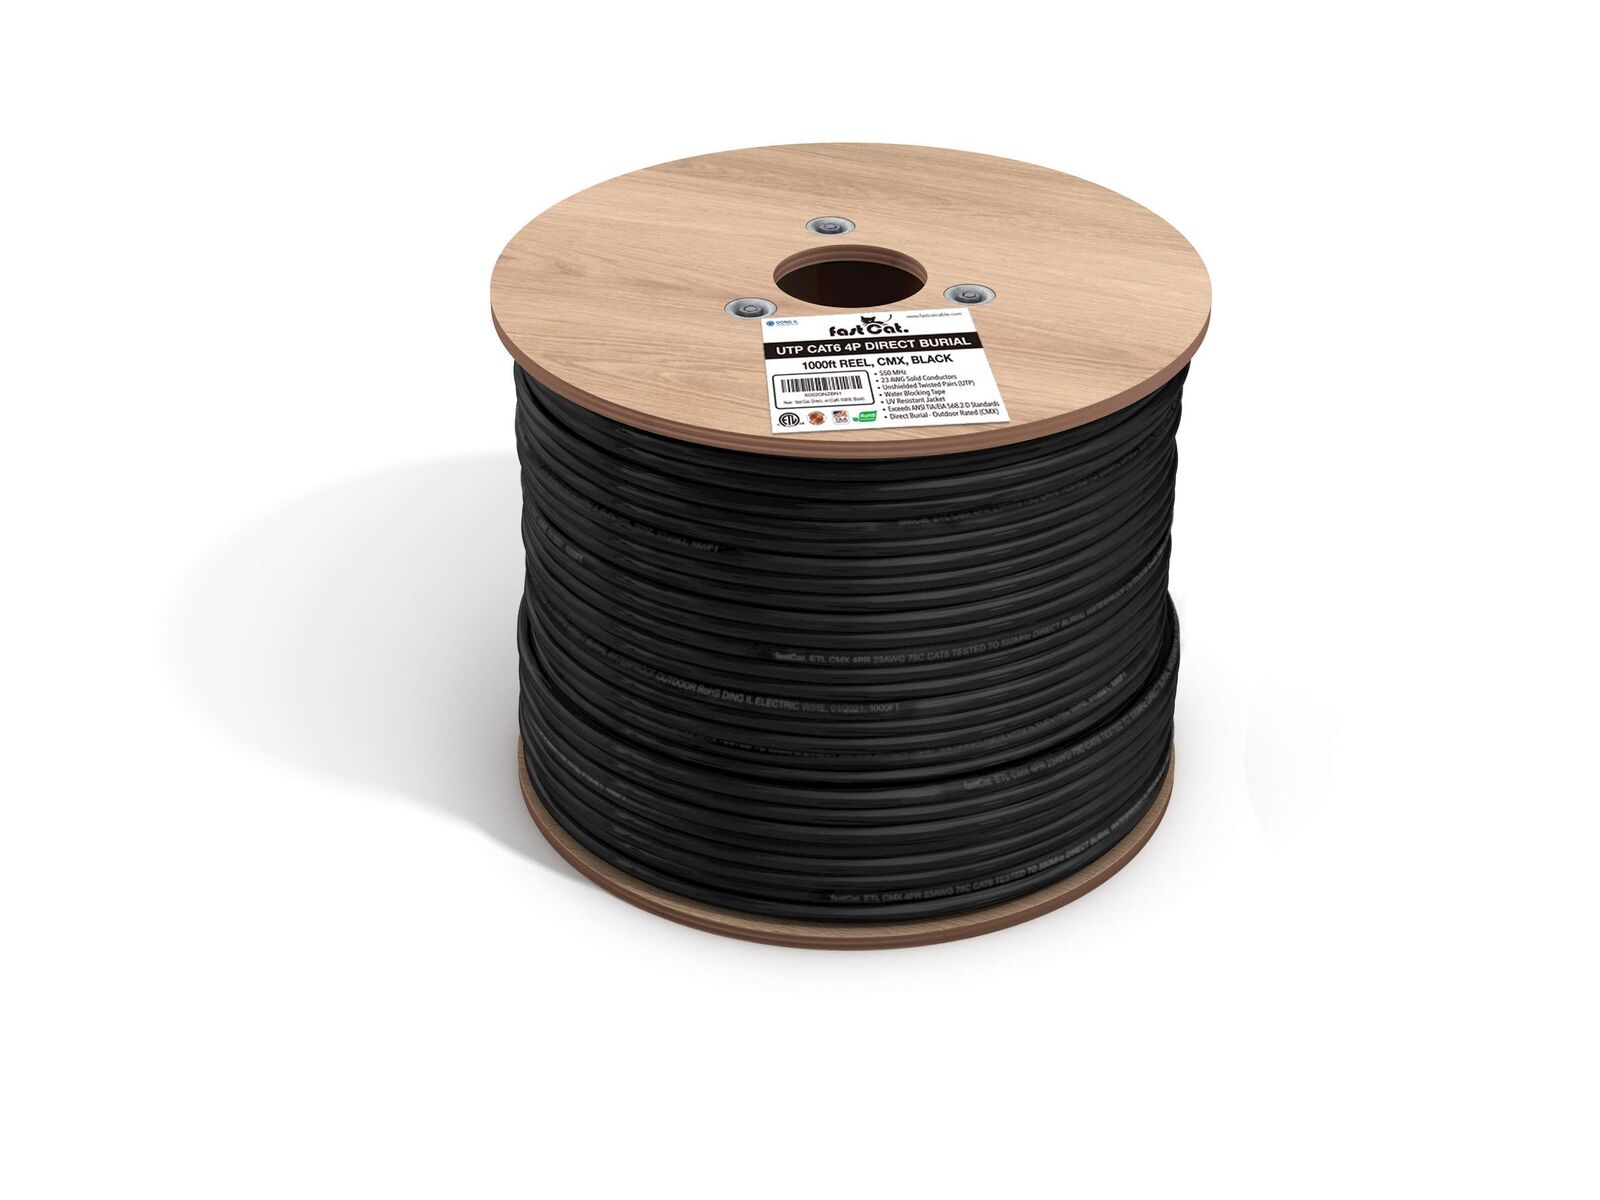 fast Cat. Cat6 Direct Burial Outdoor Ethernet Cable - 1000Ft Waterproof Cat6 Cab